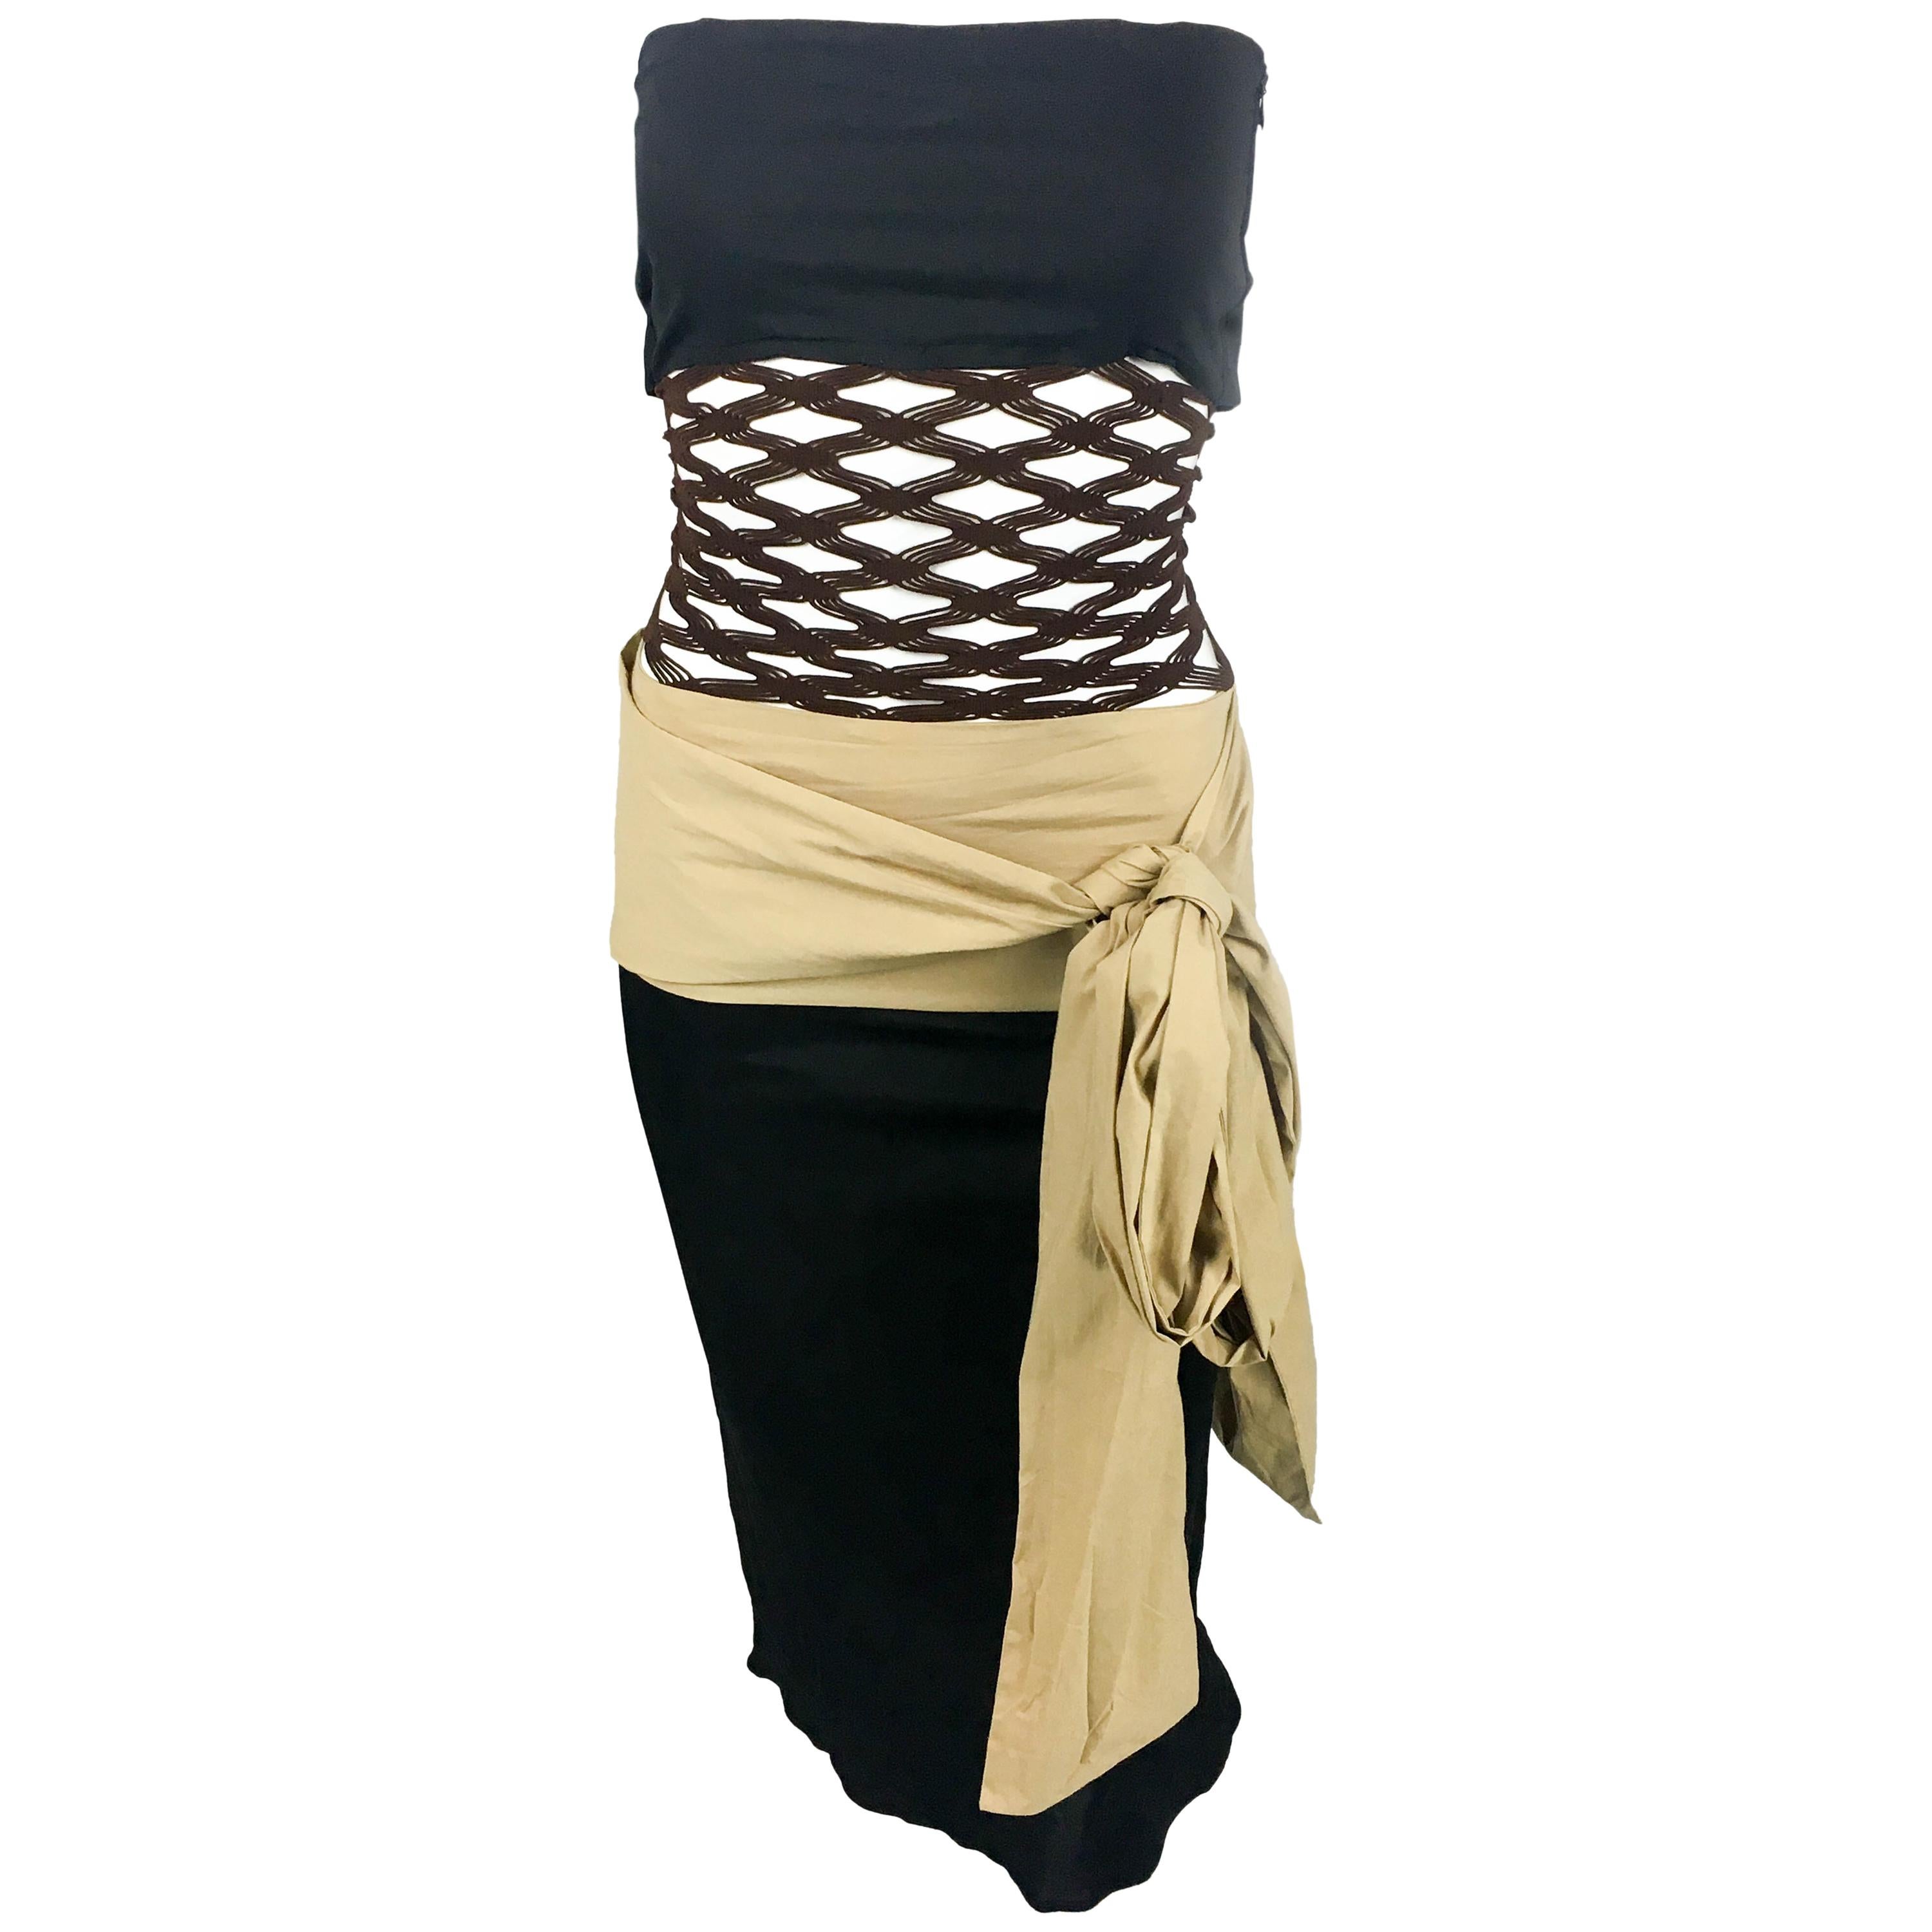 1990's Jean Paul Gaultier Black and Beige With Net Panel Dress For Sale ...